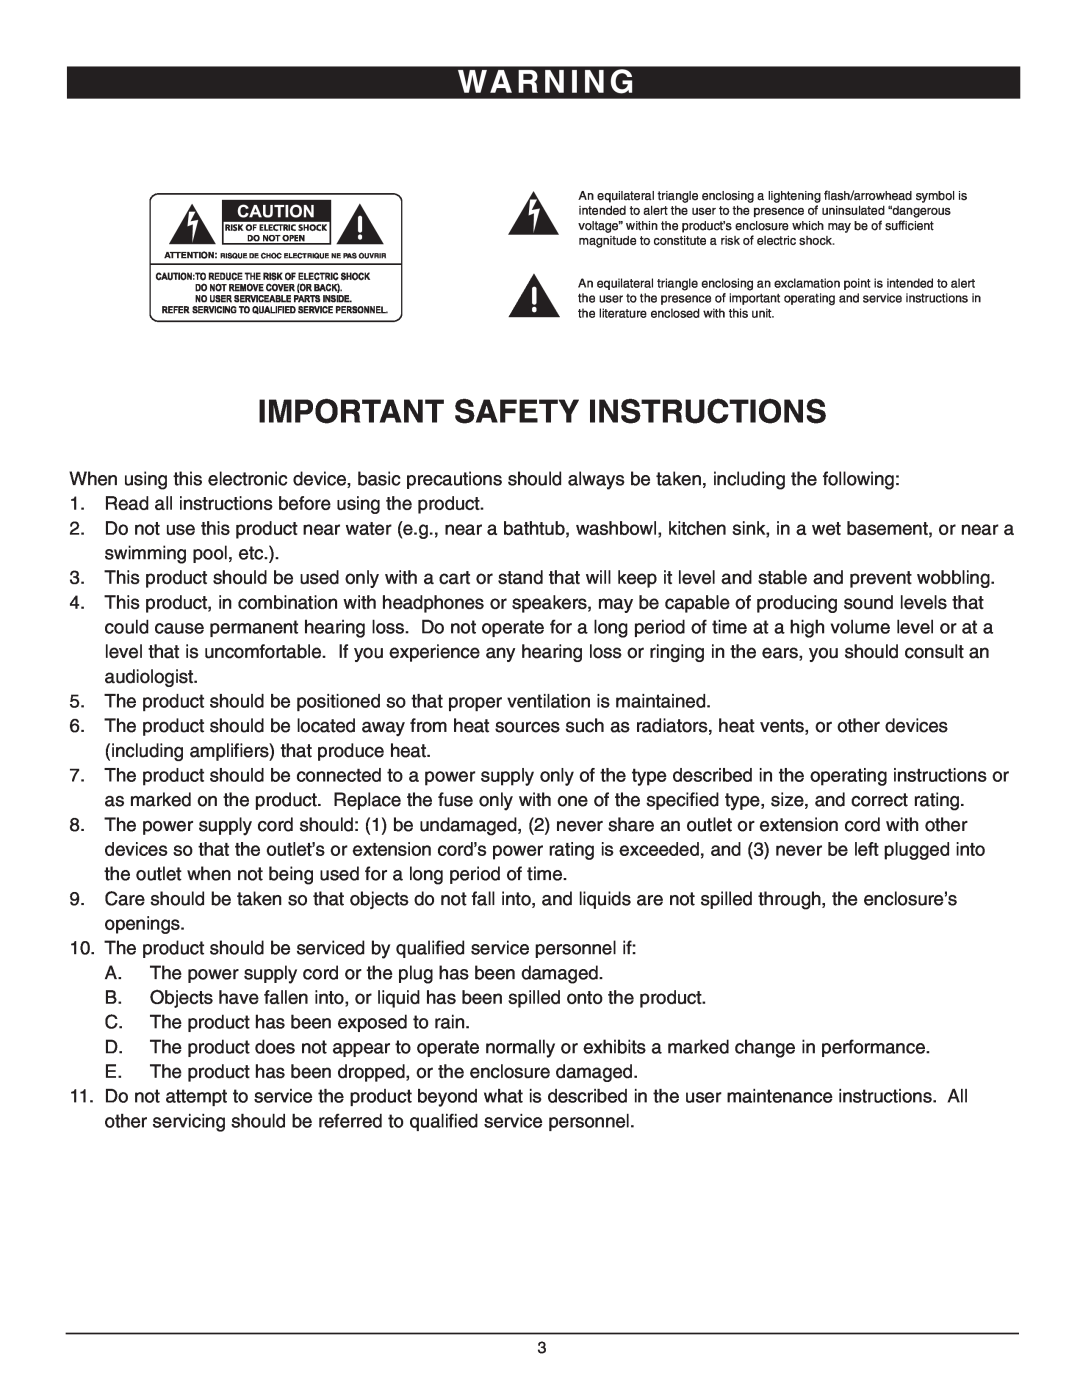 Nady Systems PPA-300 owner manual Wa R N I N G, Important Safety Instructions 